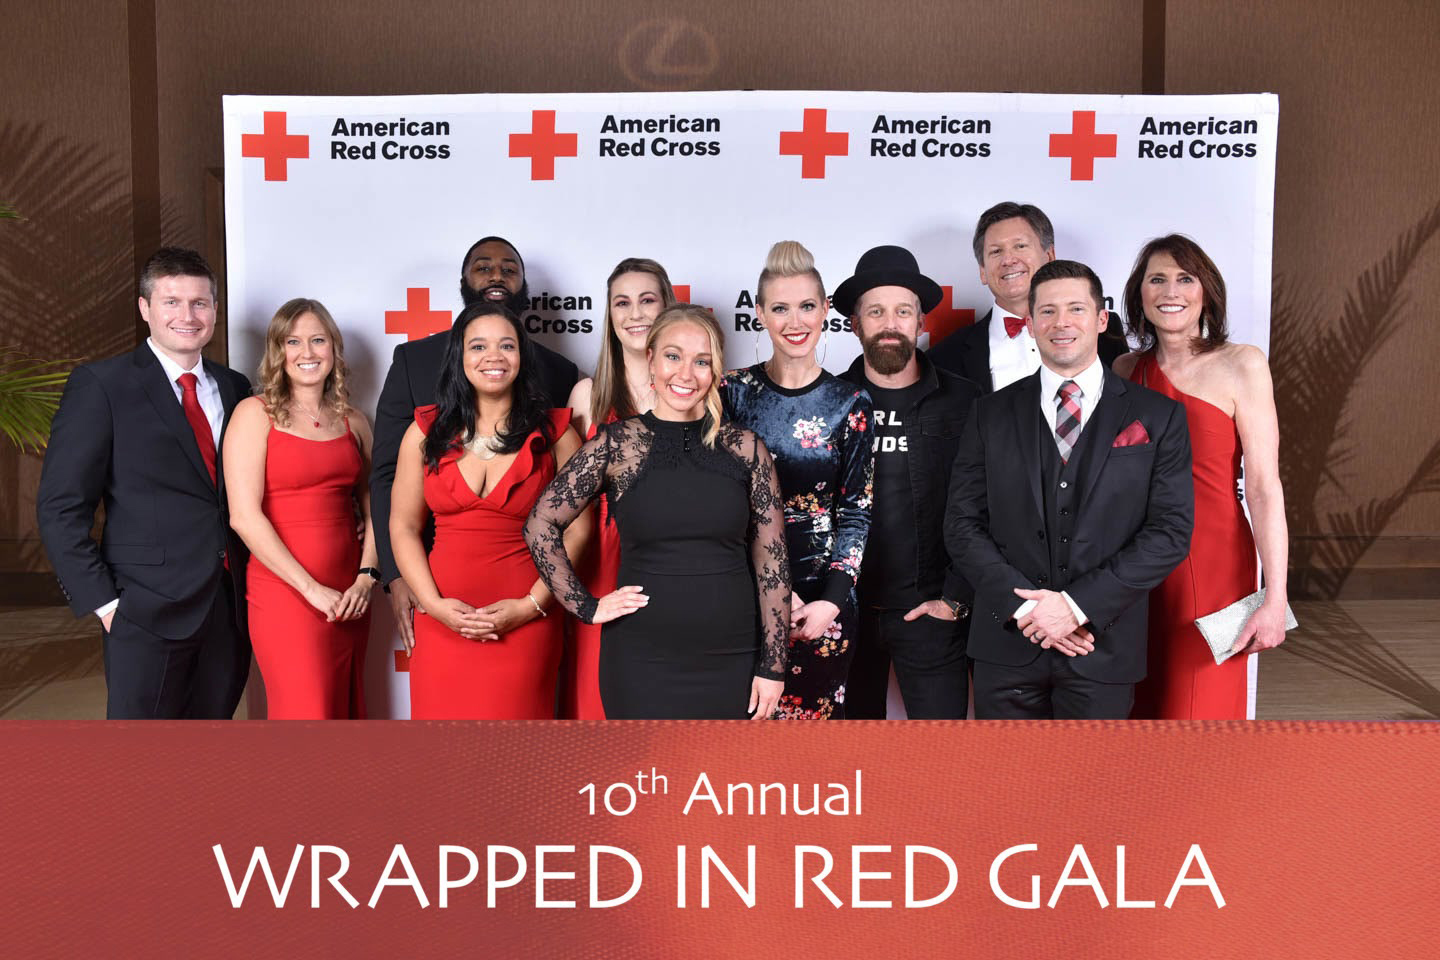 February 15, 2020: 10th Annual Wrapped in Red Gala